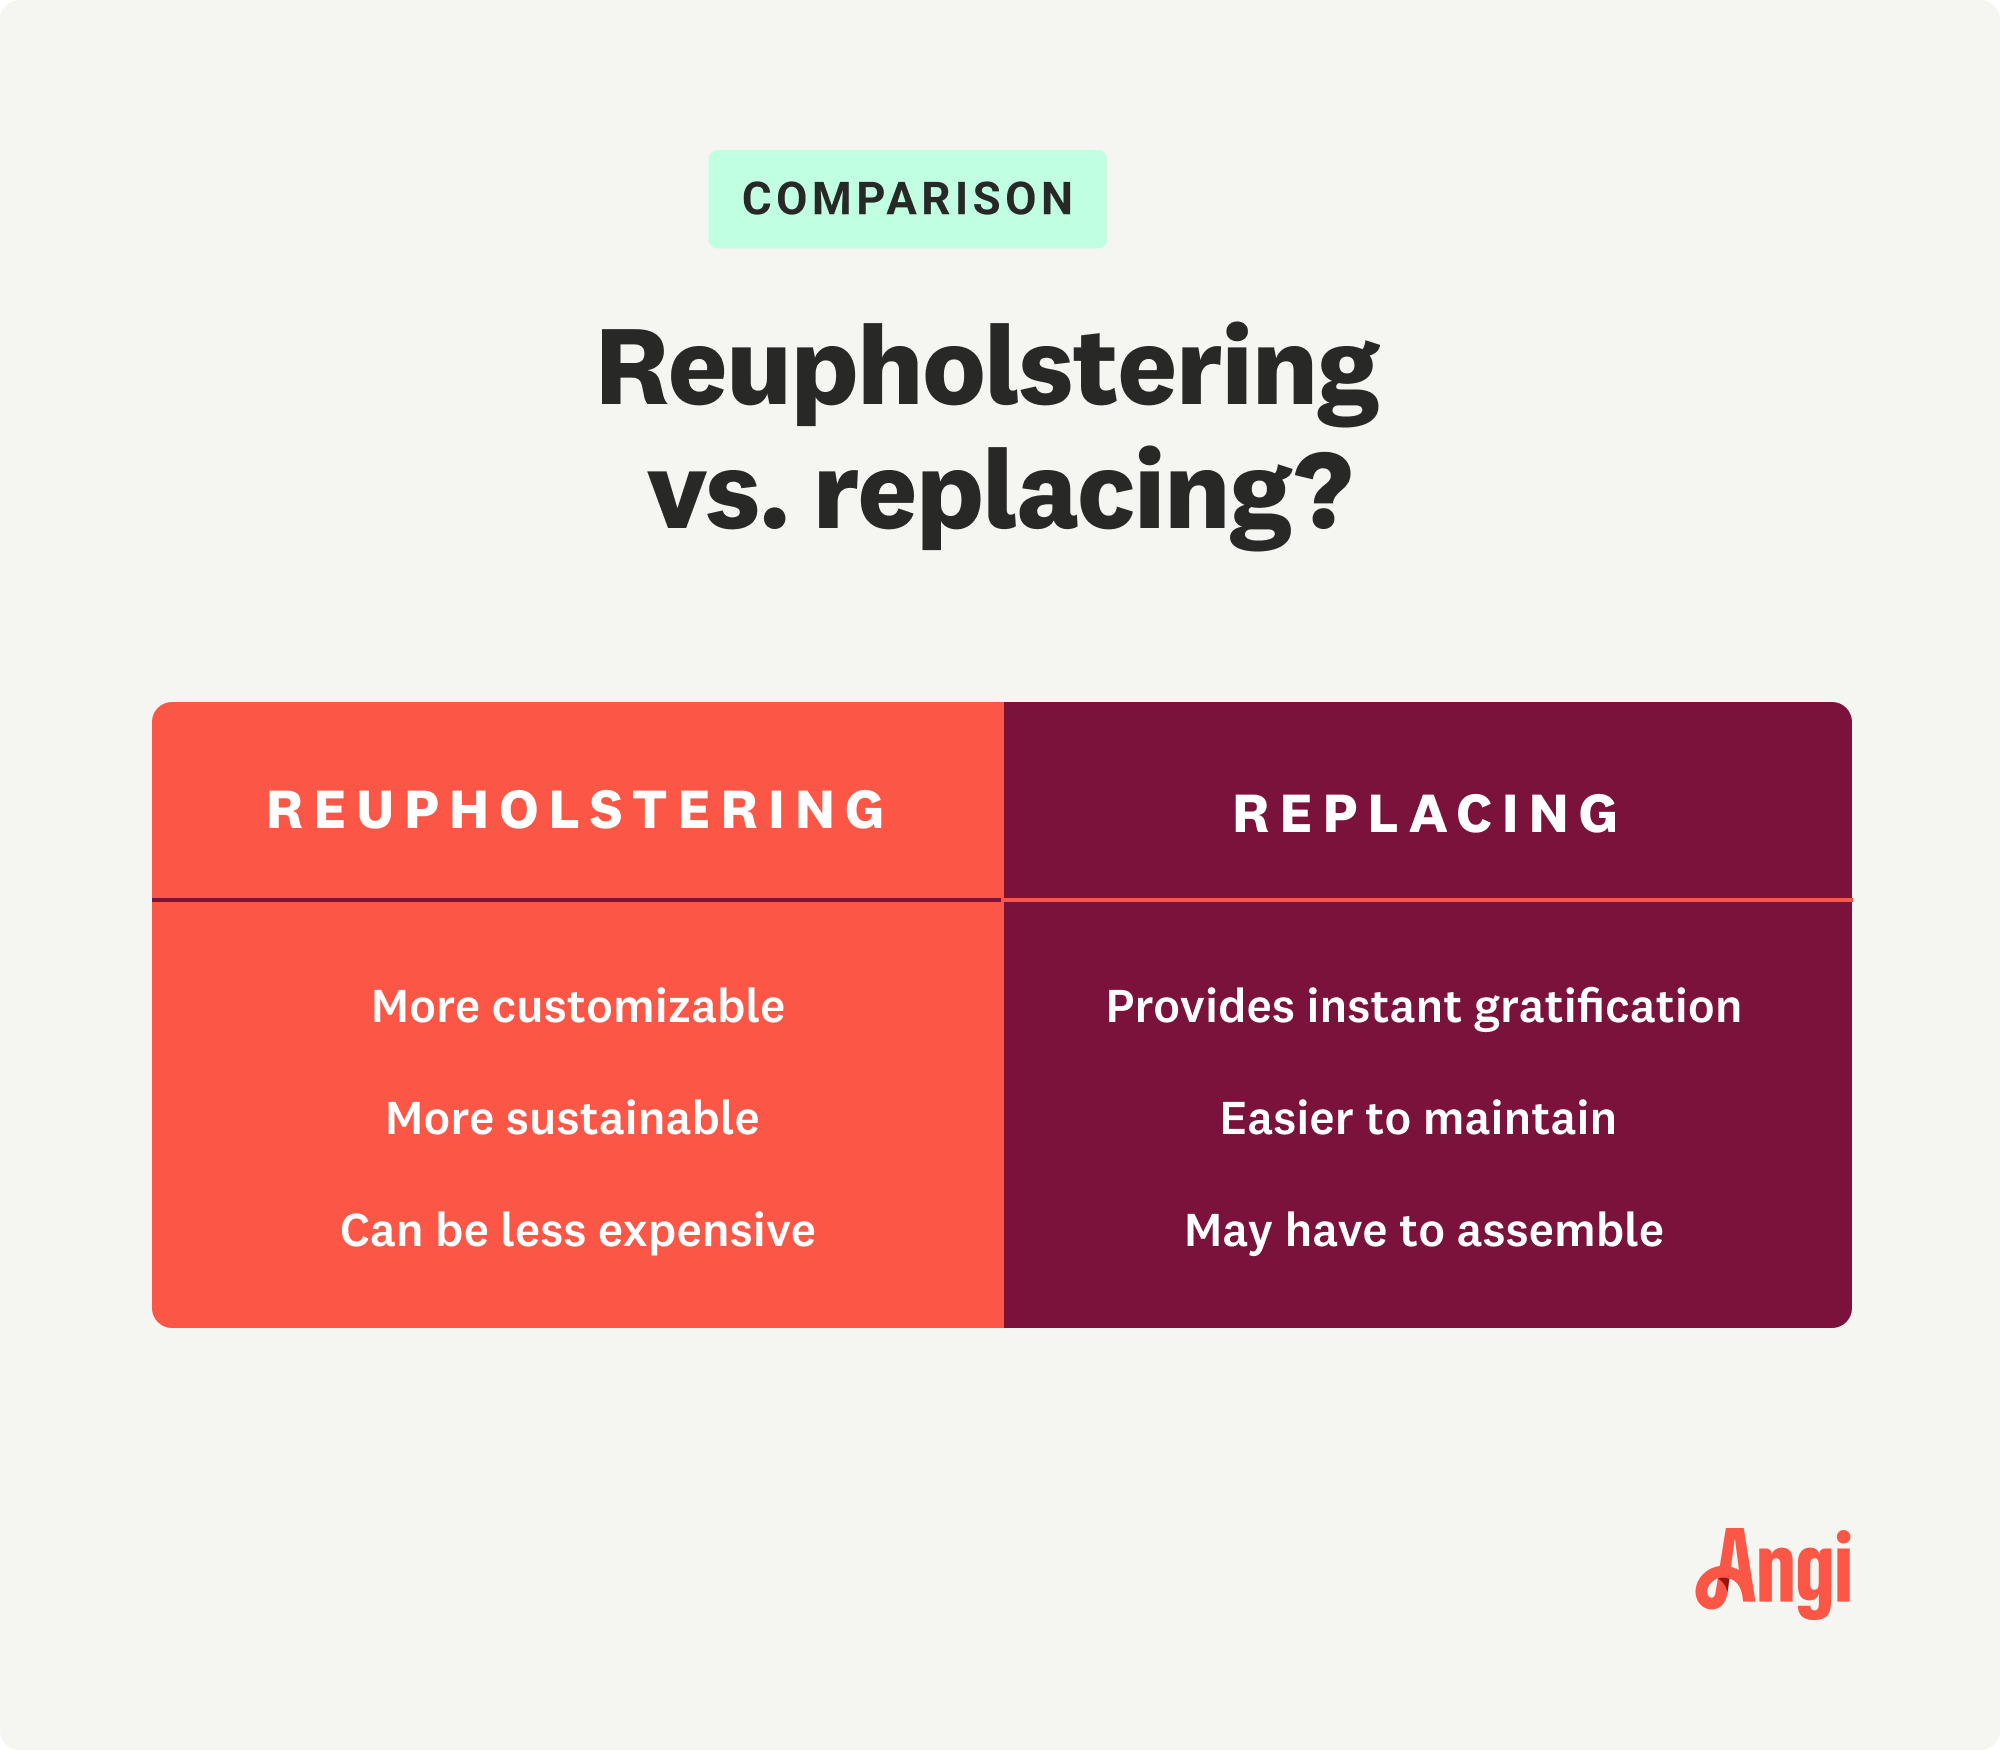 Reupholstering versus replacing furniture comparison, with reupholstering being less expensive